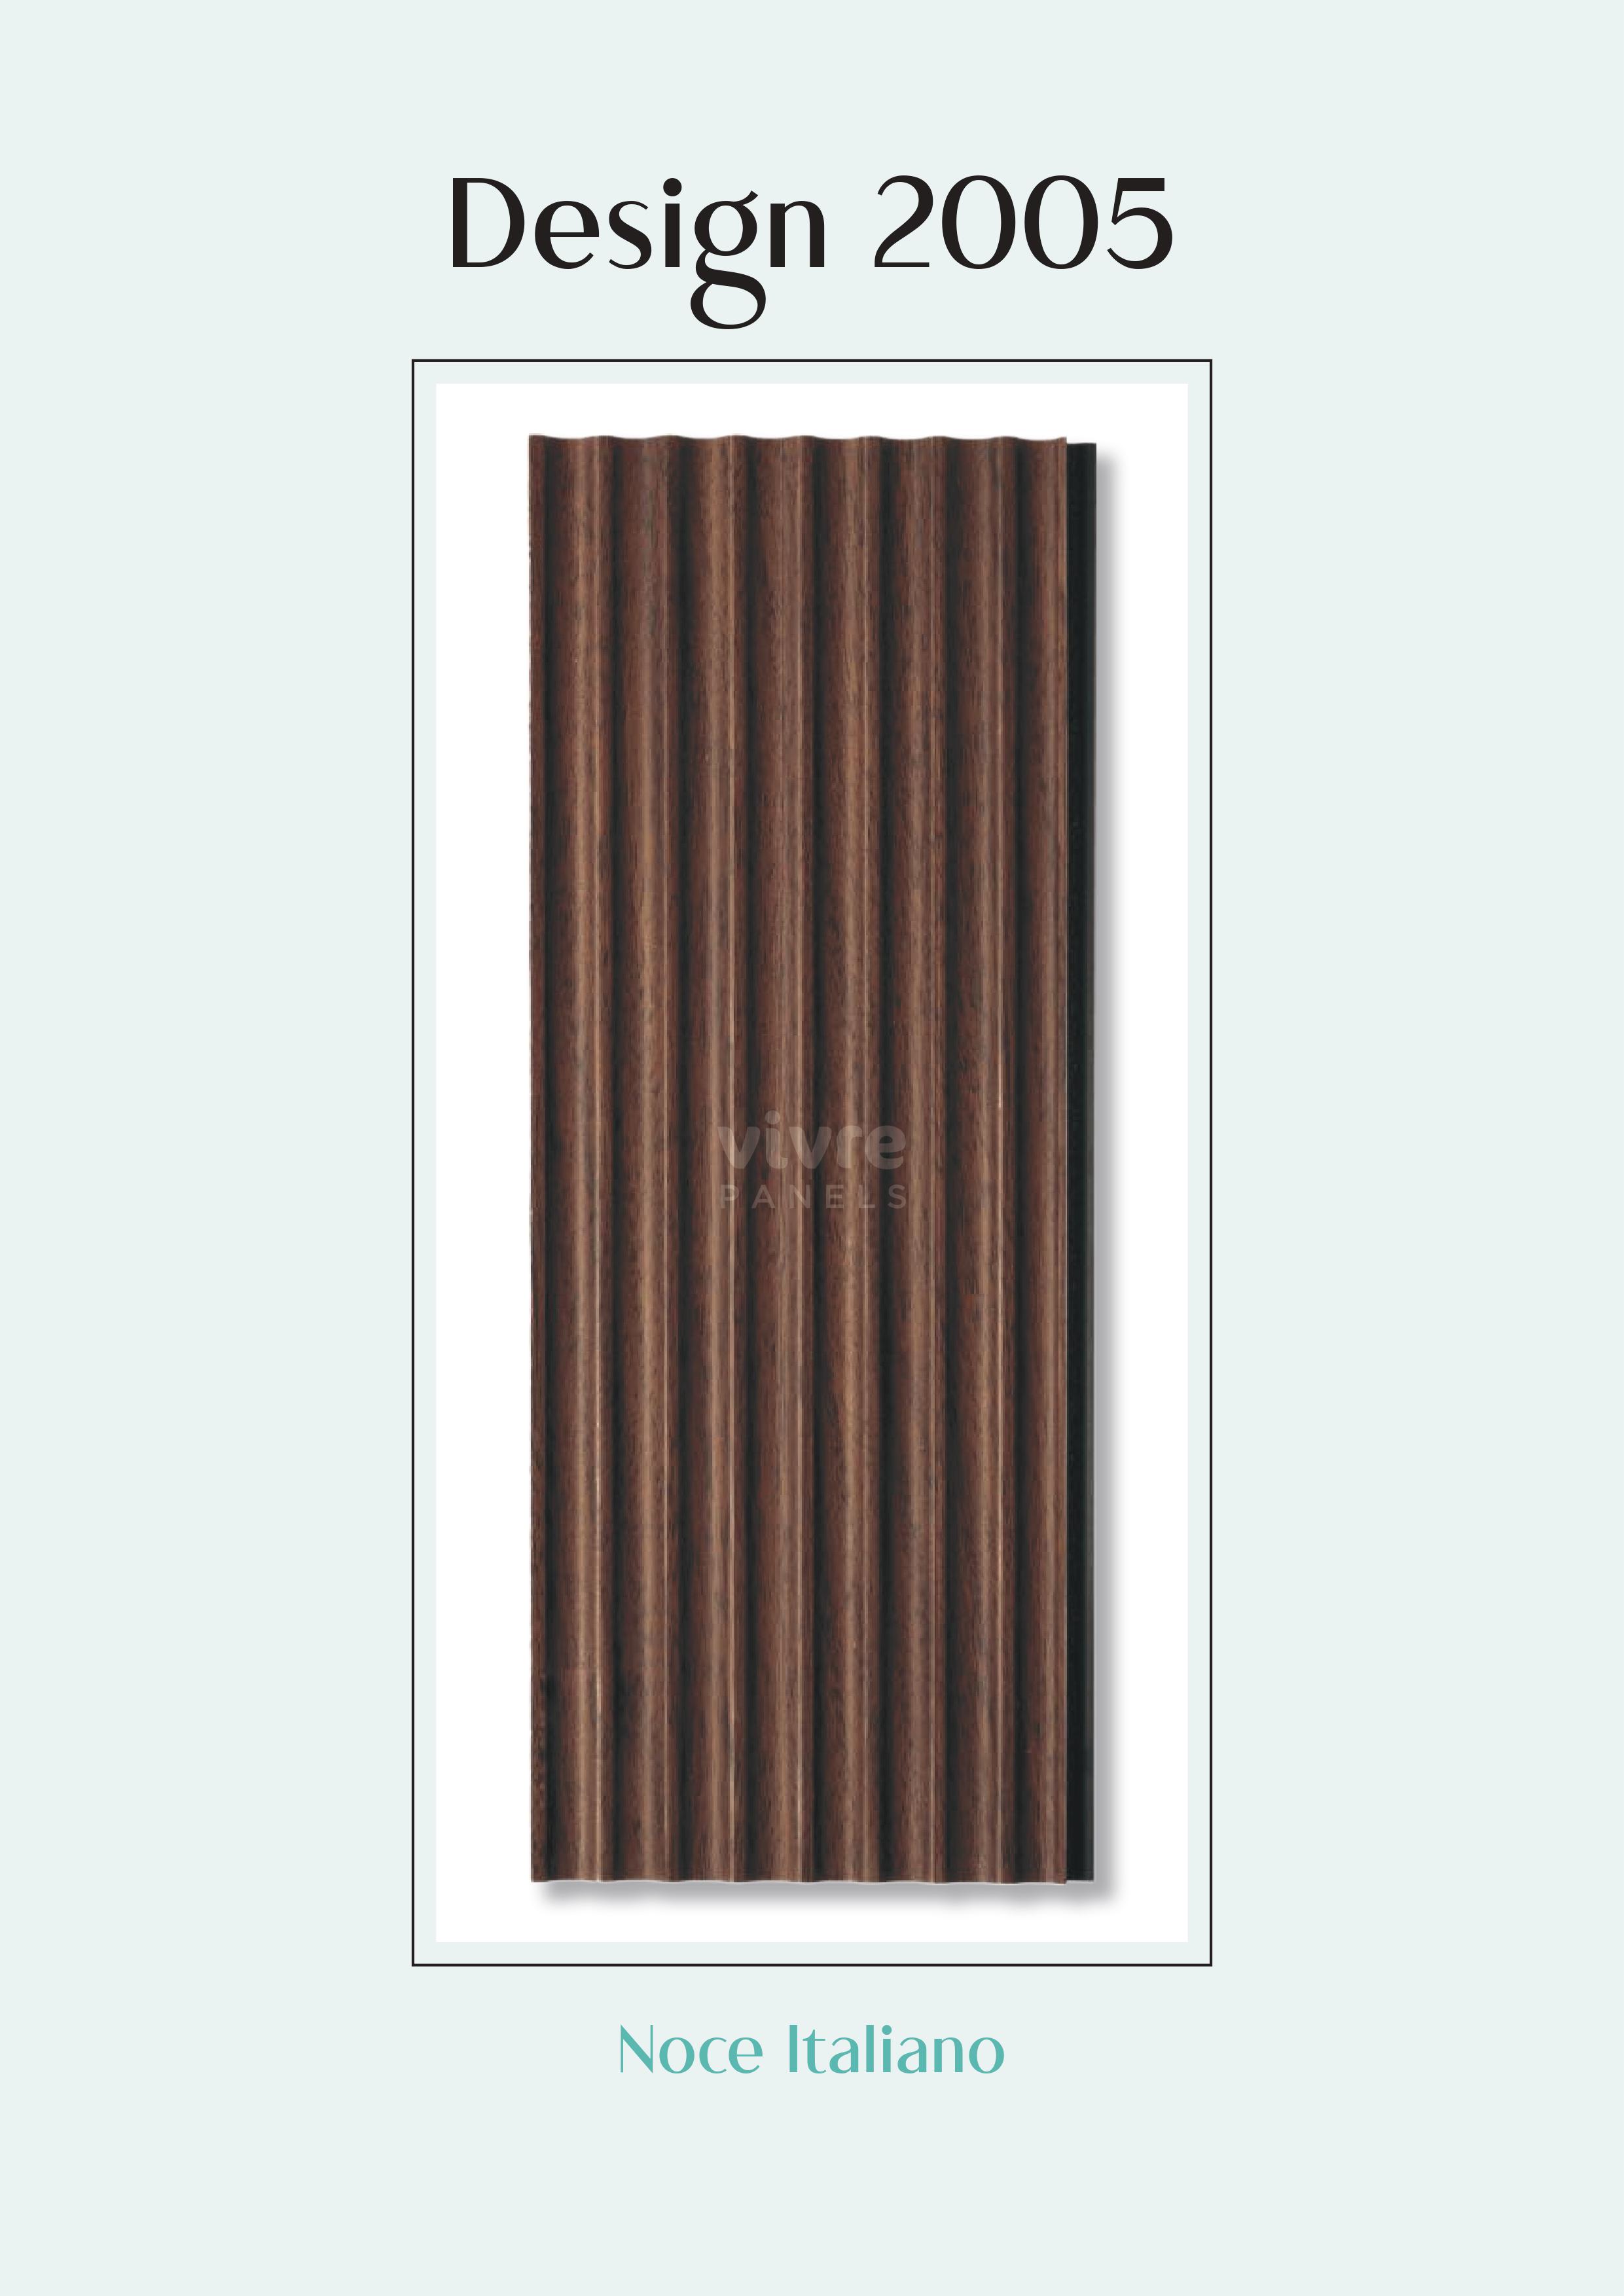 Modern Charcoal Wall Paneling for Architectural Louvers - 09 Design